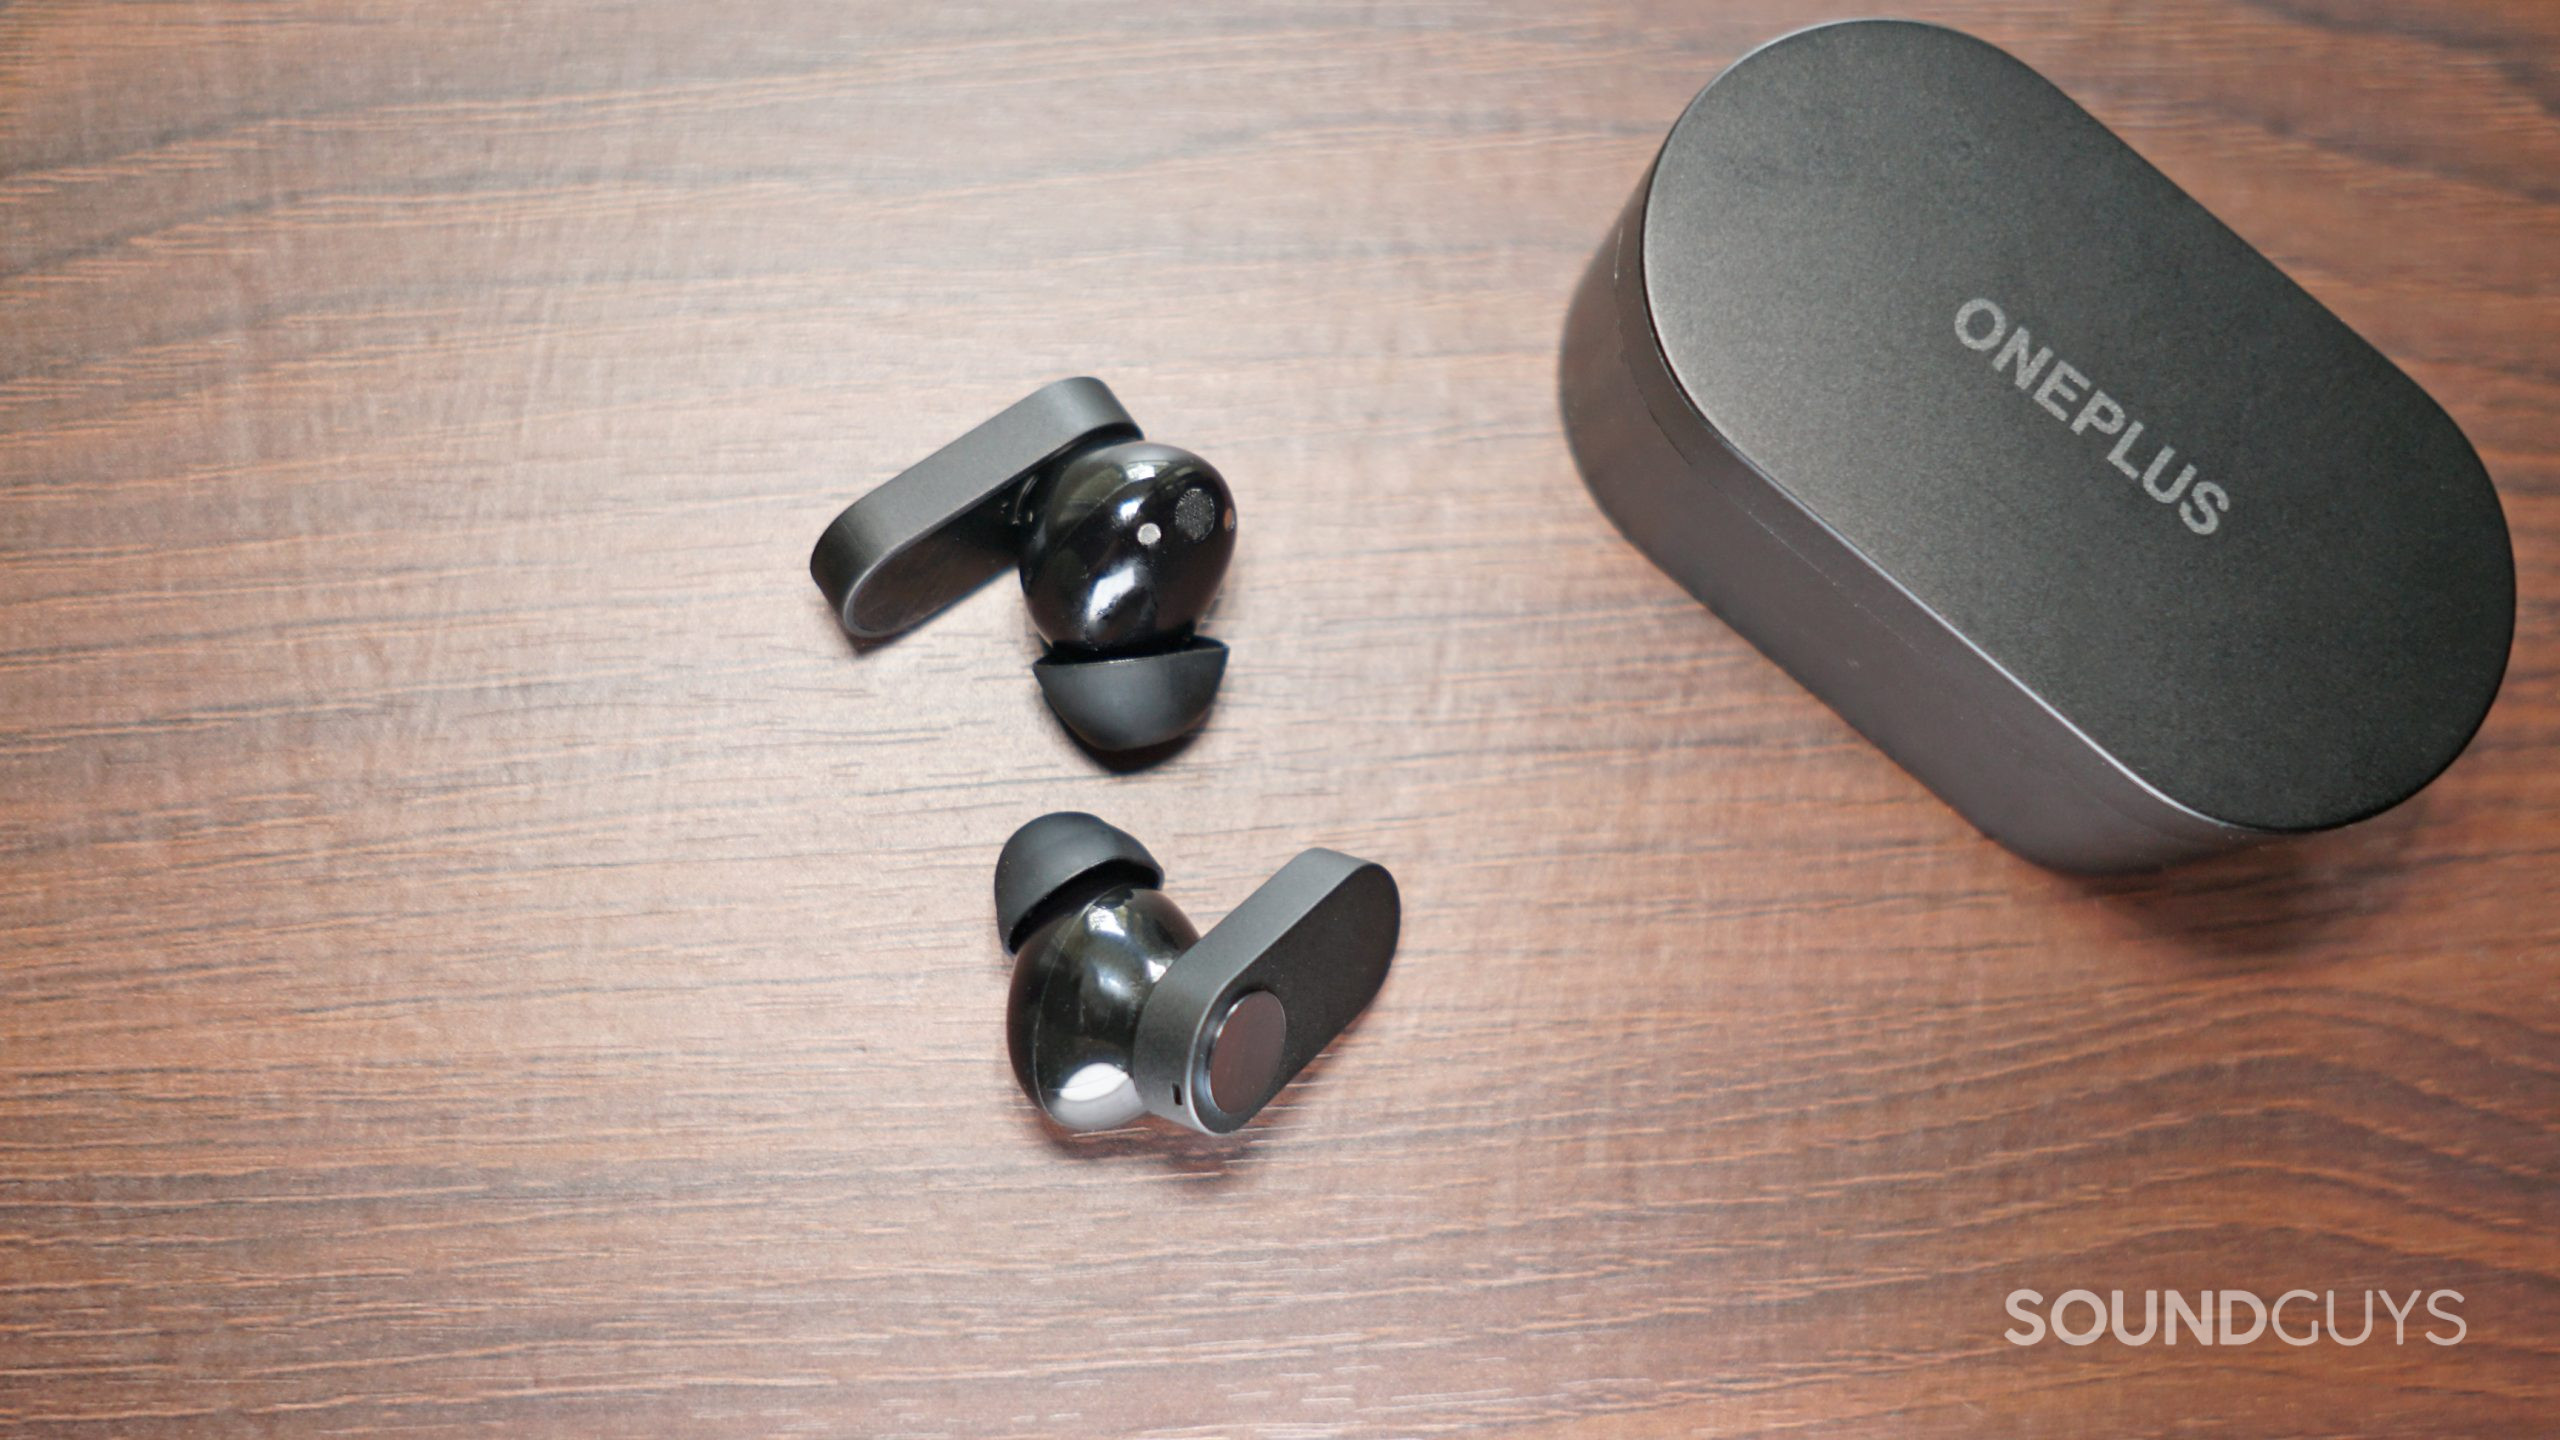 The OnePlus Nord Buds true wireless earbuds lay on a wooden surface.